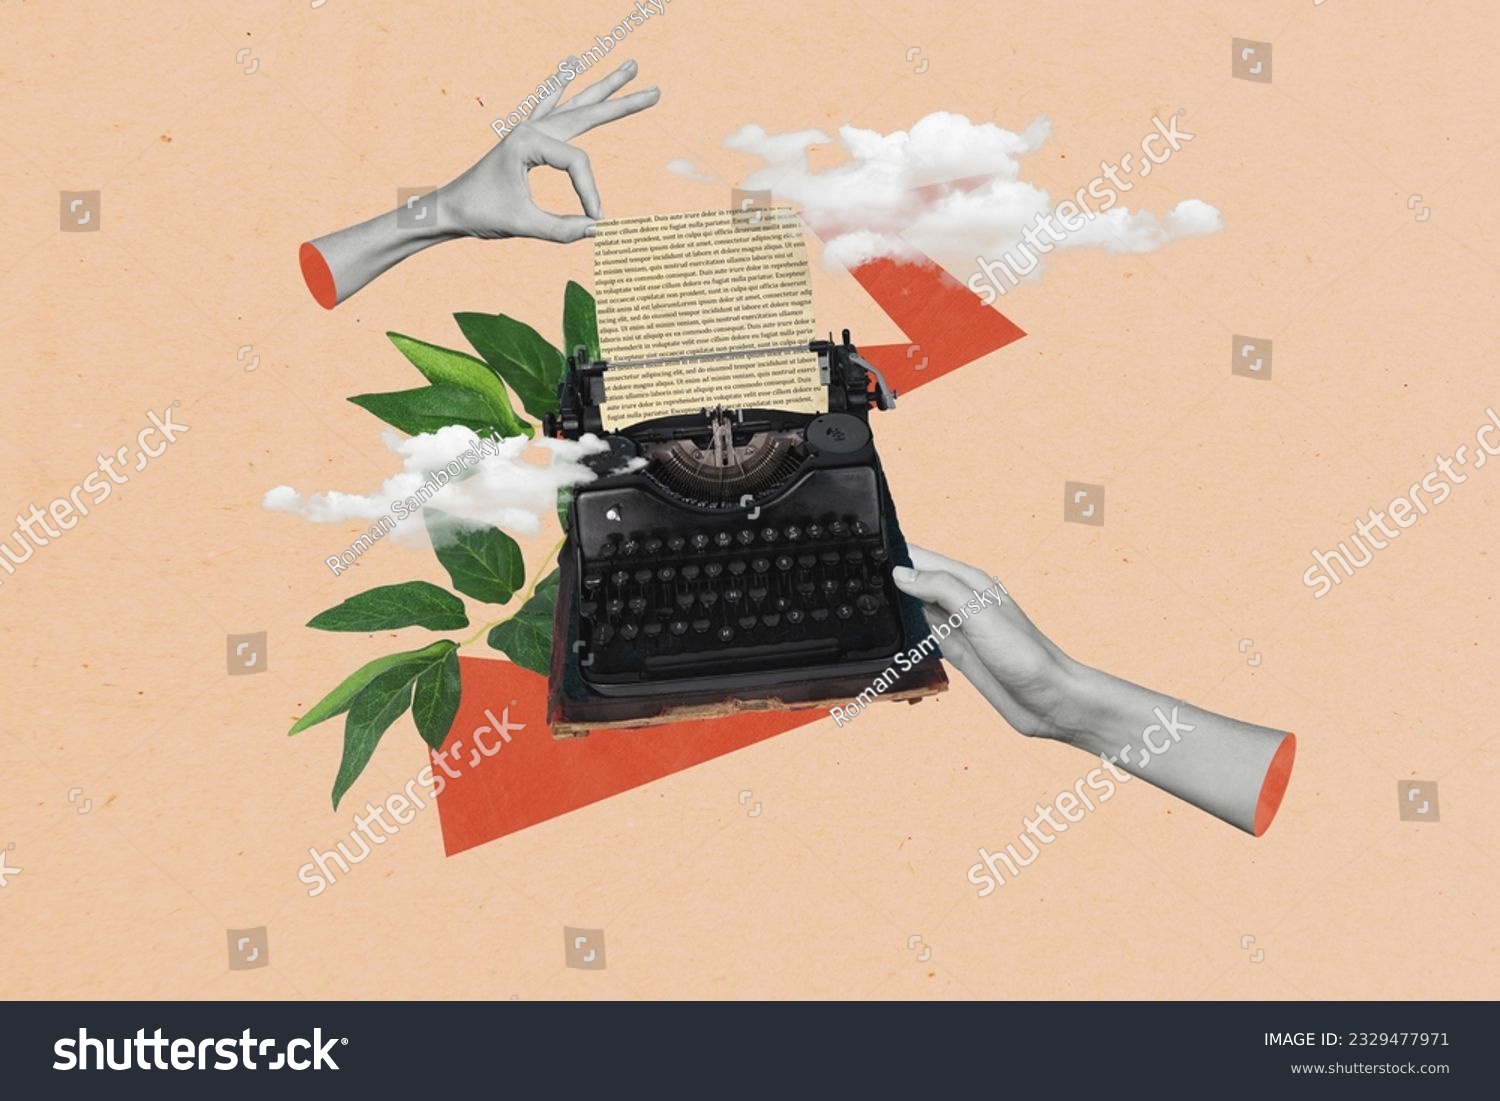 Collage creative picture of hands holding mechanical retro keyboard journalist typewriter antique document isolated on beige background #2329477971